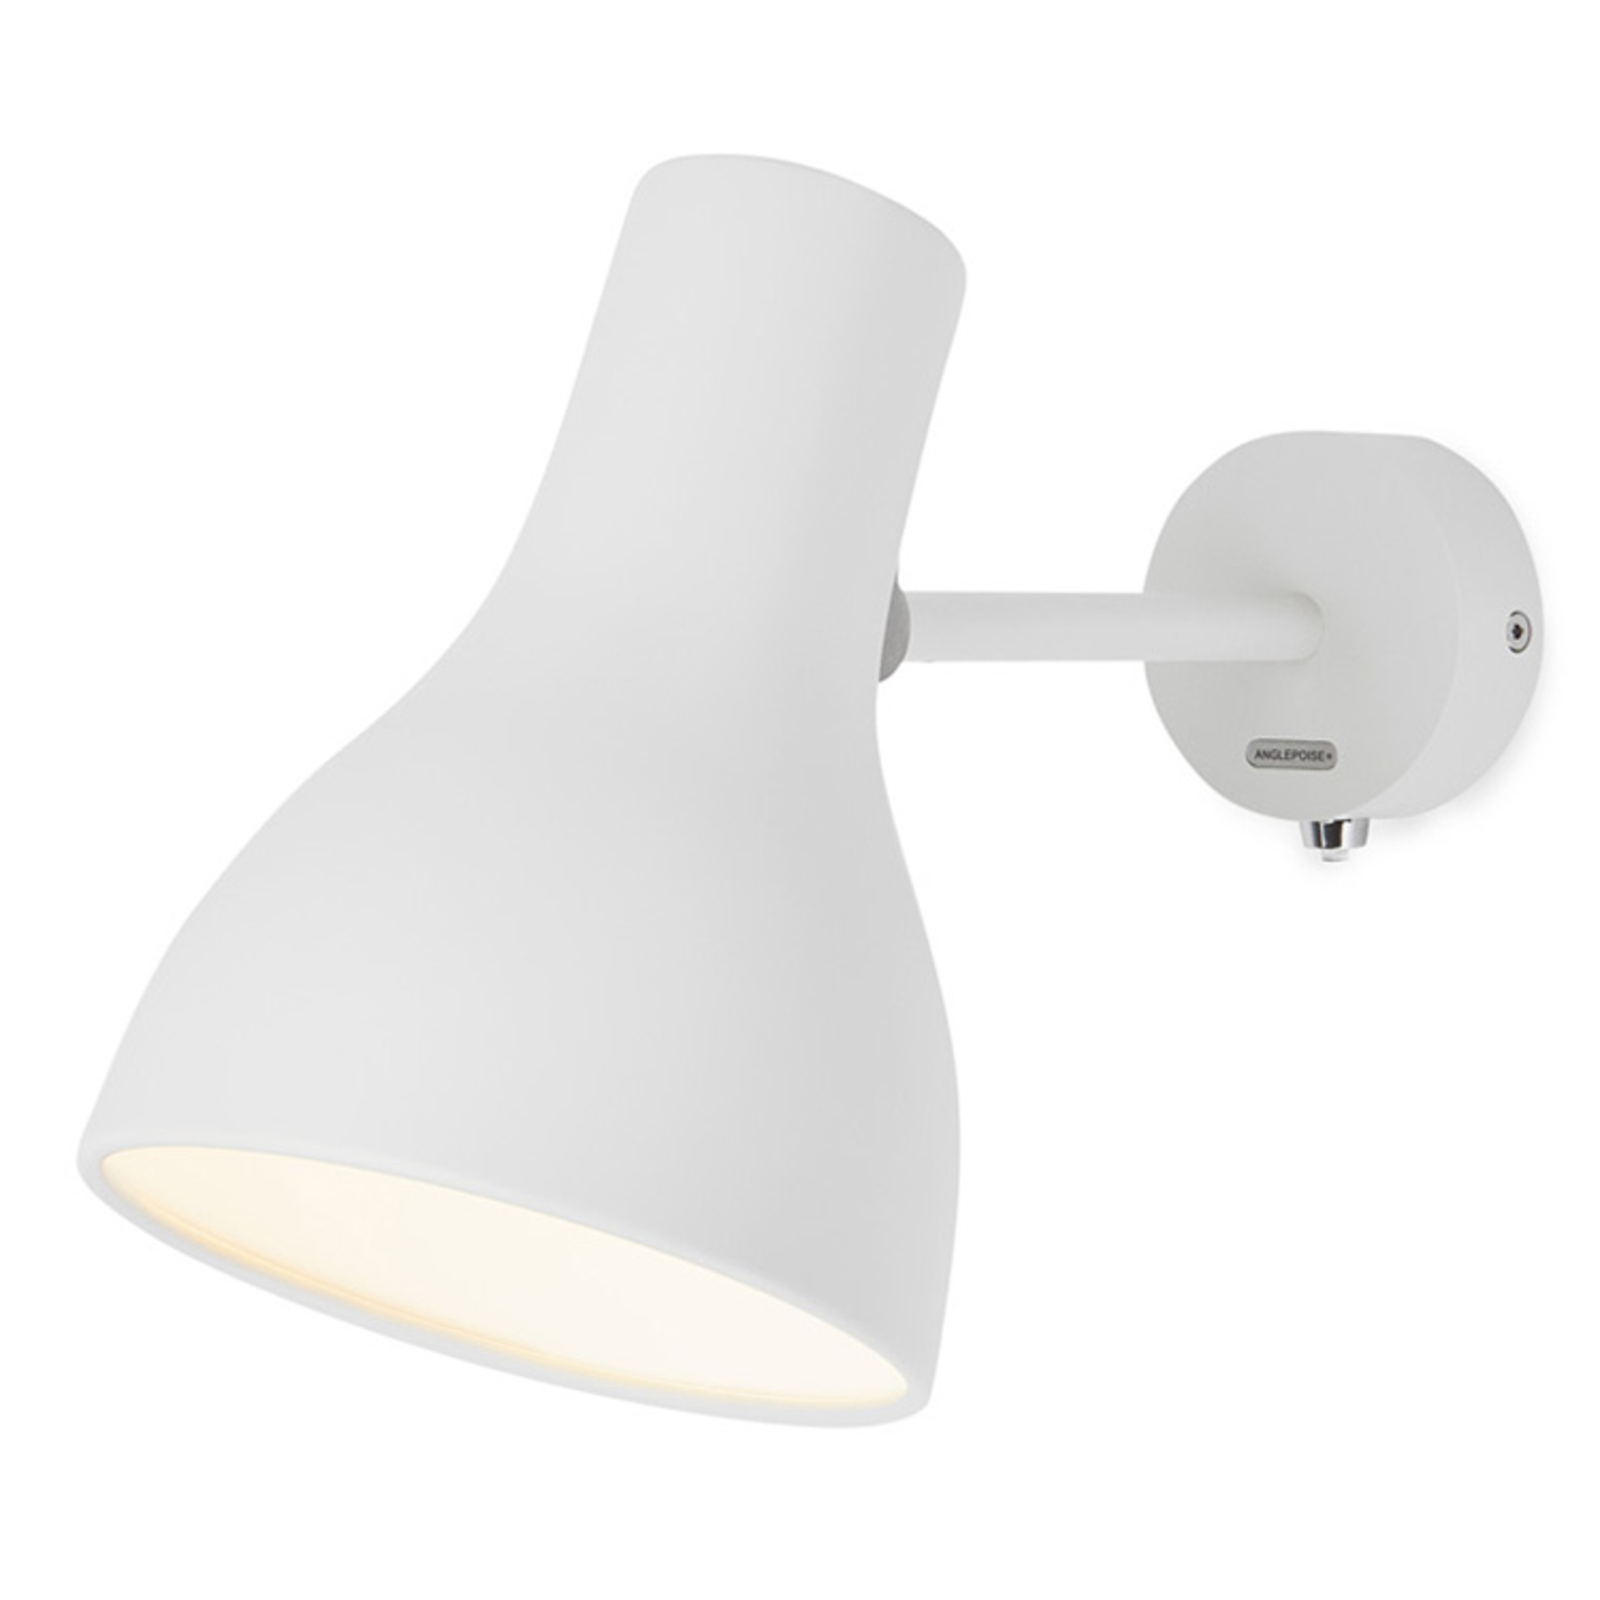 Anglepoise Type 75 applique blanche